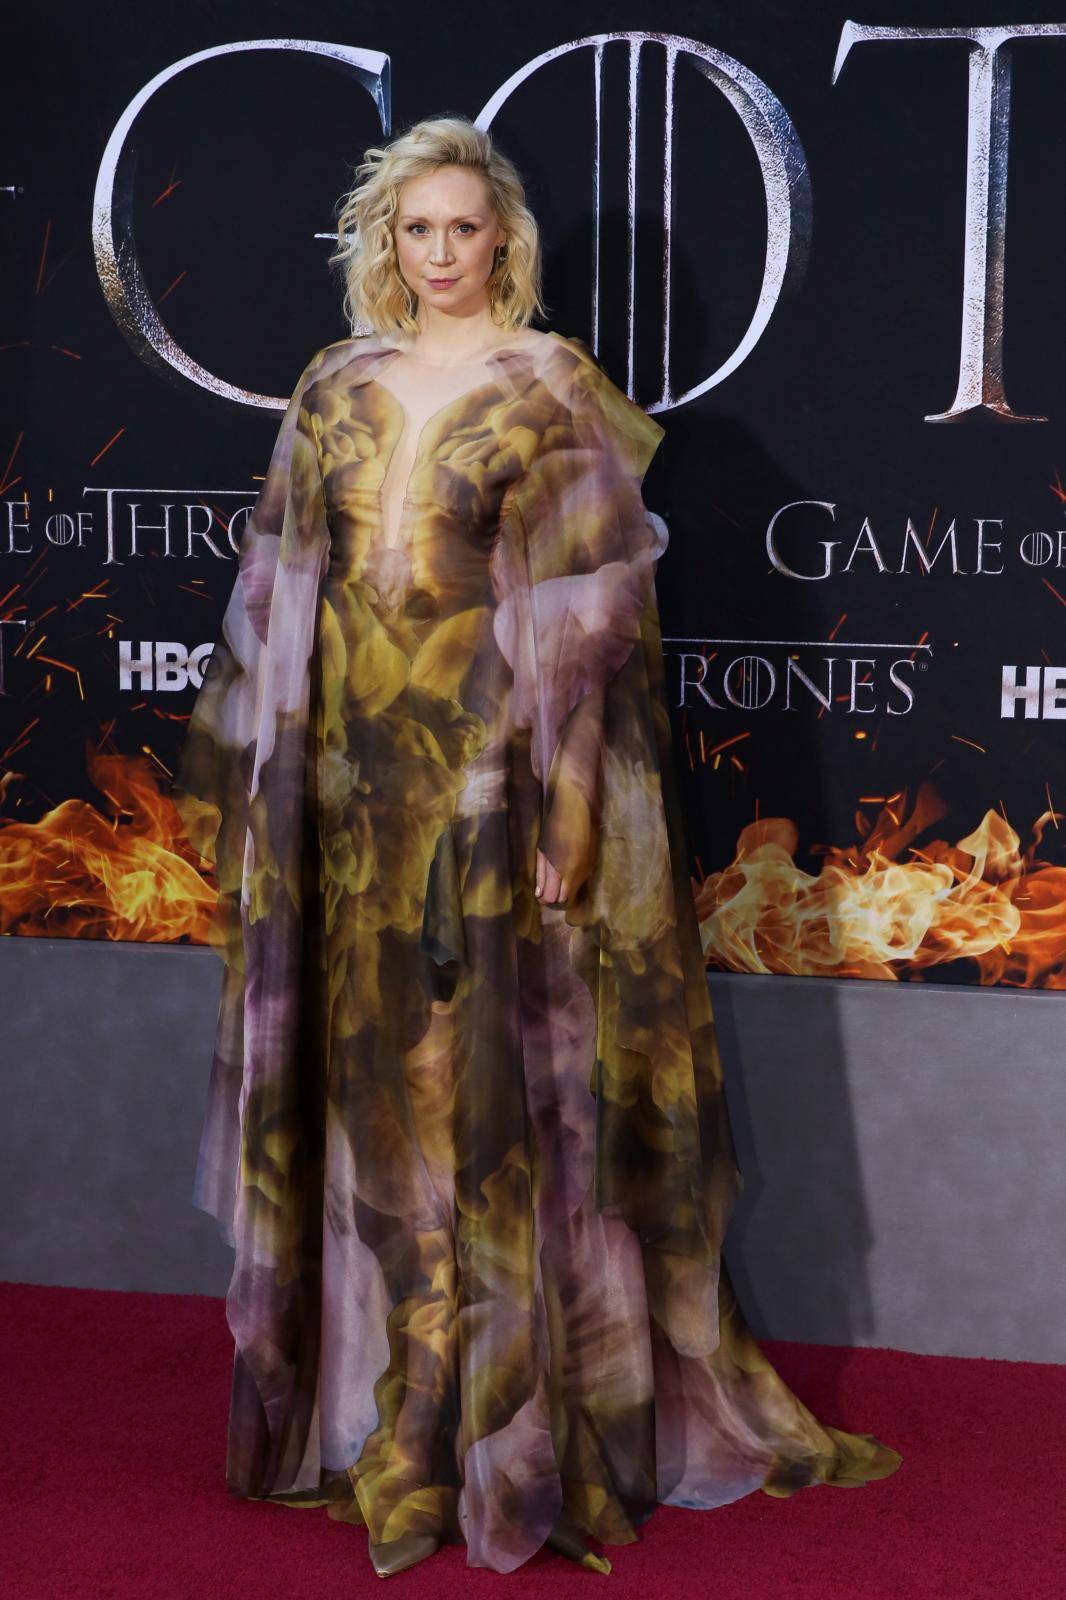 Gwendoline Christie arrives for the premiere of the final season of "Game of Thrones" at Radio City Music Hall in New York